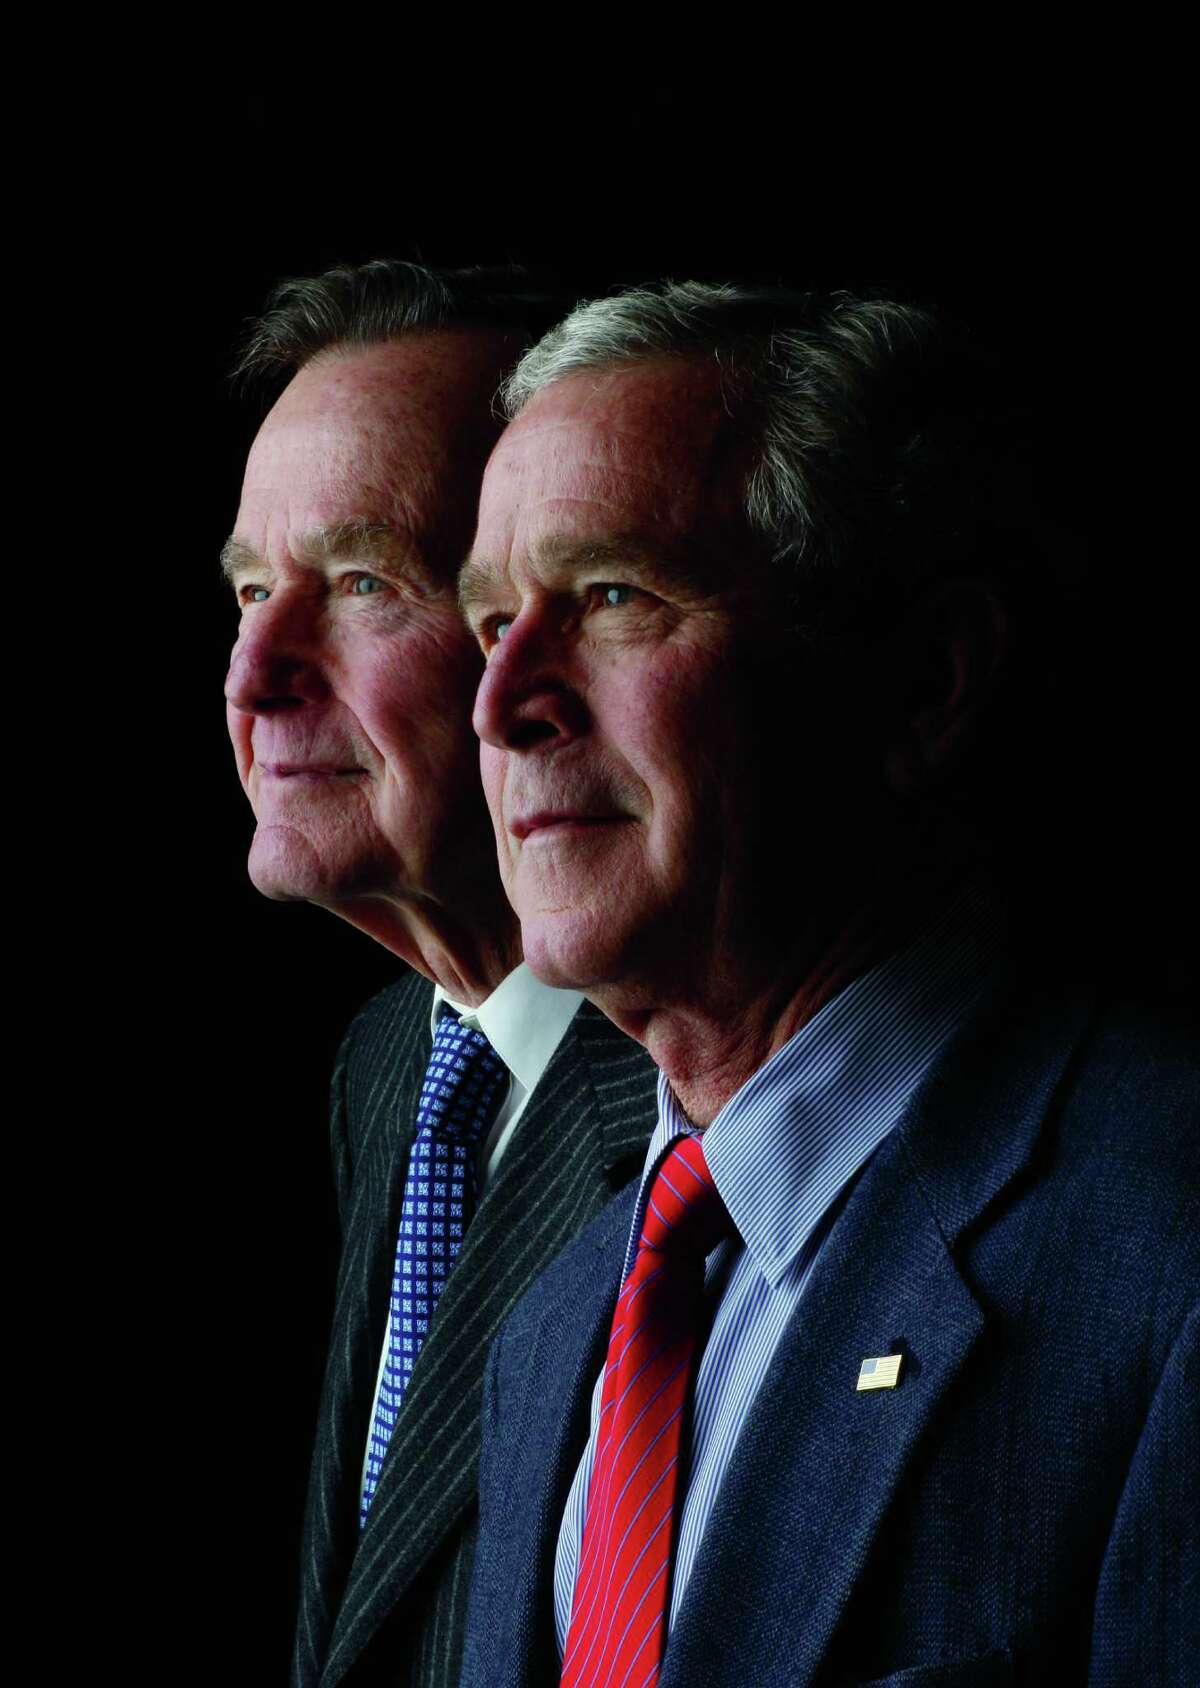 President George W. Bush and former President George H.W. Bush pose for a father-son portrait during the 2008 Easter weekend at Camp David in Thurmont, MD. Photo by Eric Draper, Courtesy of the George W. Bush Presidential Library and Museum